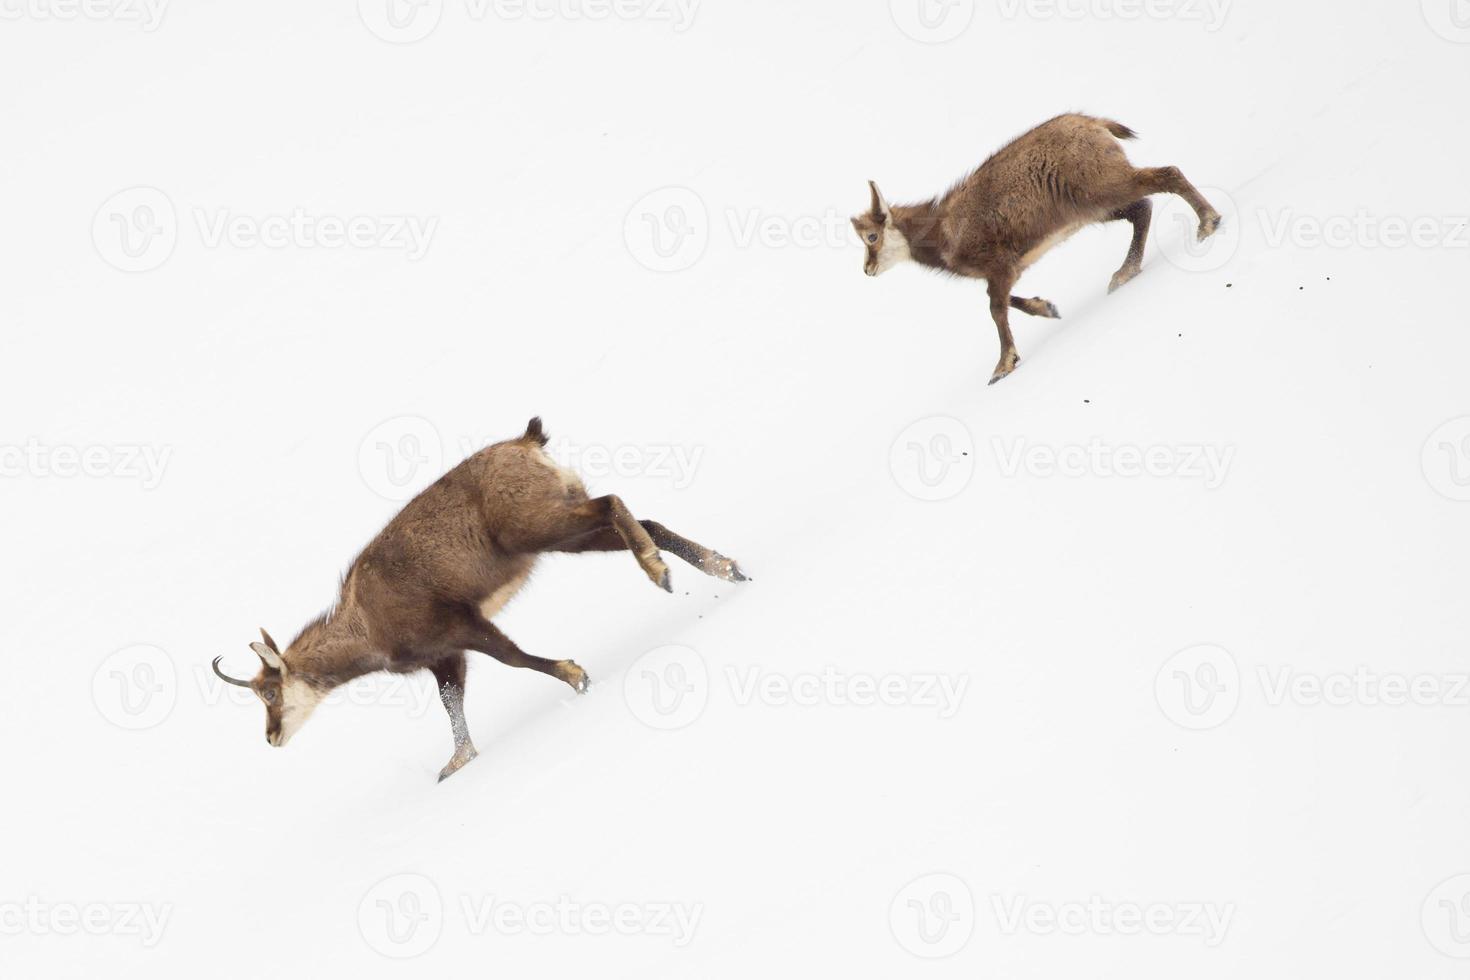 An isolated chamois deer in the snow background photo